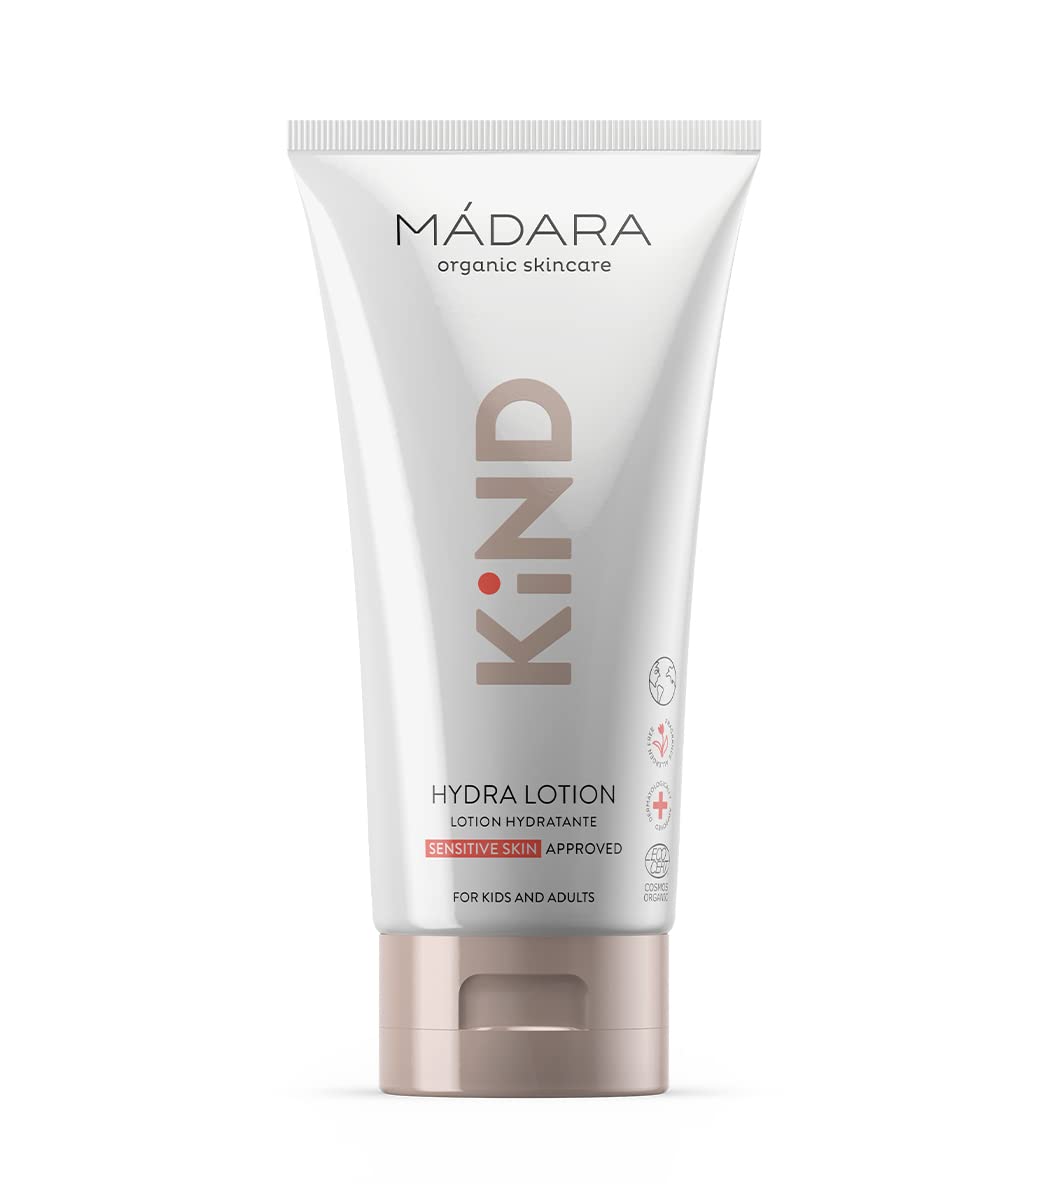 MÁDARA Organic Skincare | KIND Hydra Body Lotion – Organic Certified Replenishing Baby Lotion, Hydrates And Nourishes Sensitive Skin, Suitable For The Whole Family, Dermatologically Tested, 5.9oz